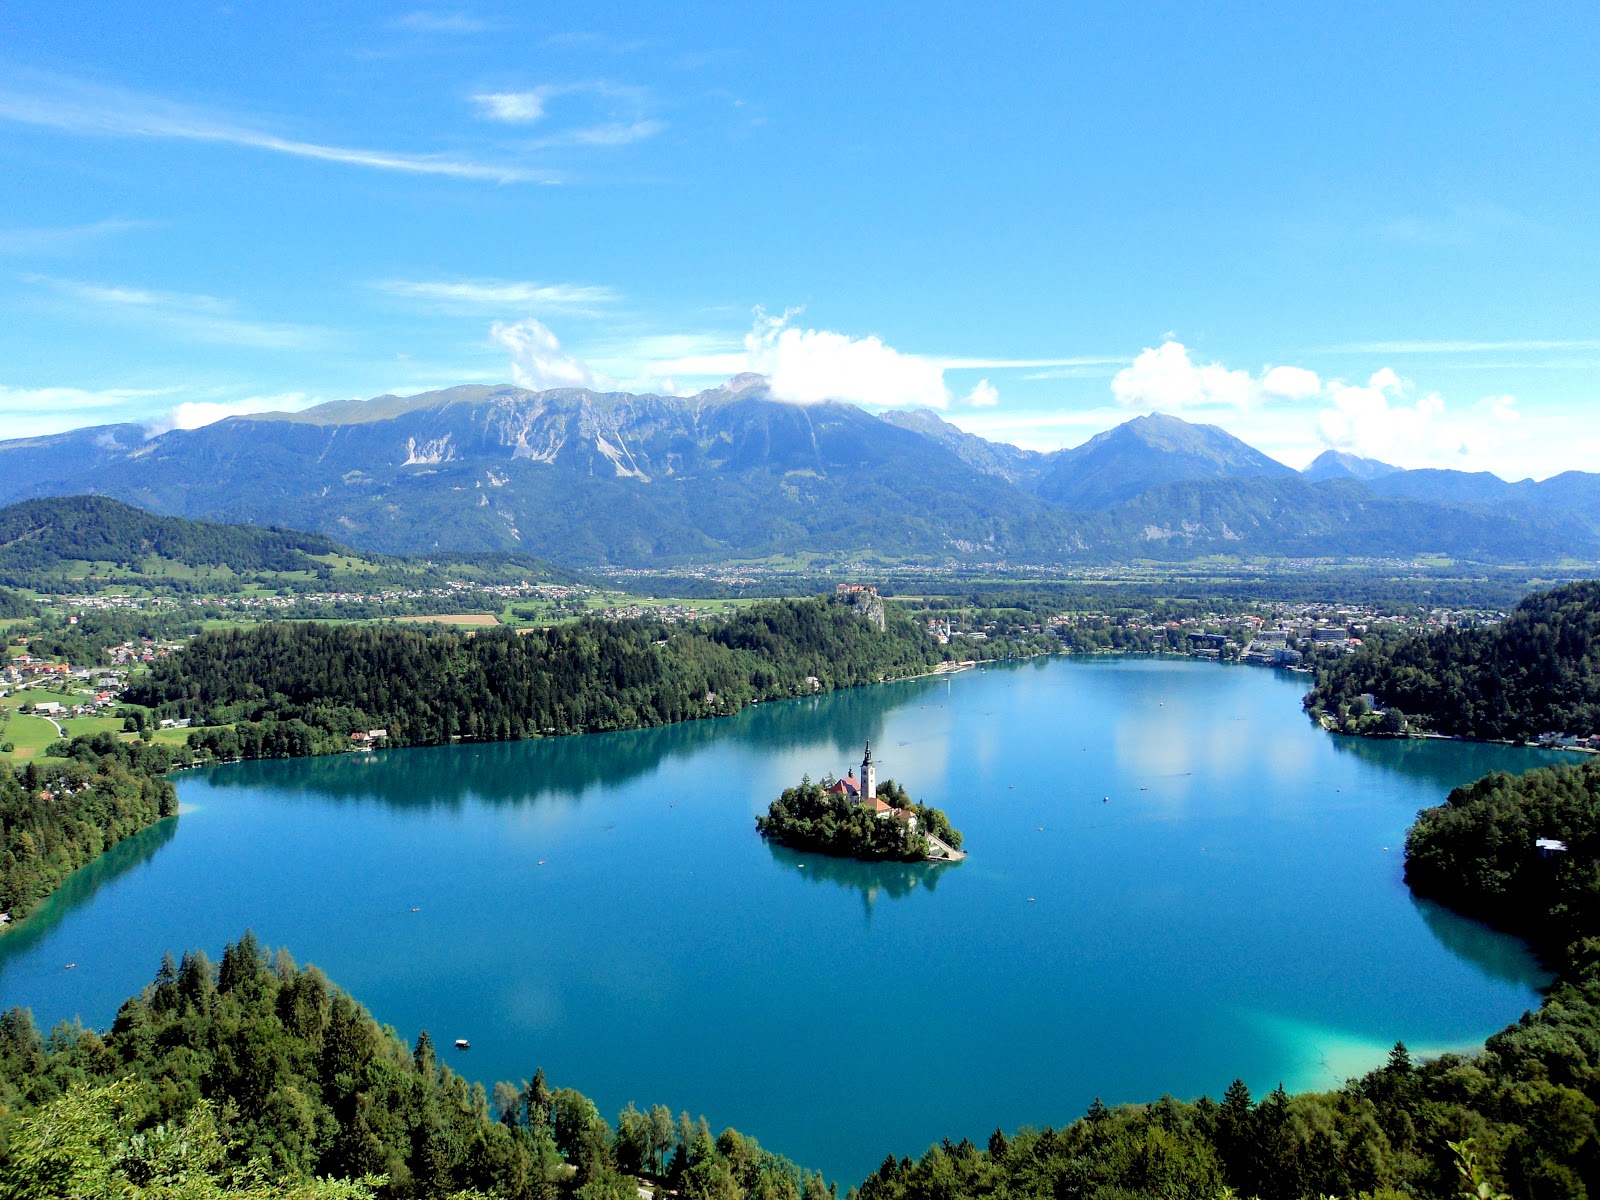 The natural wonders of Lake Bled in Slovenia.